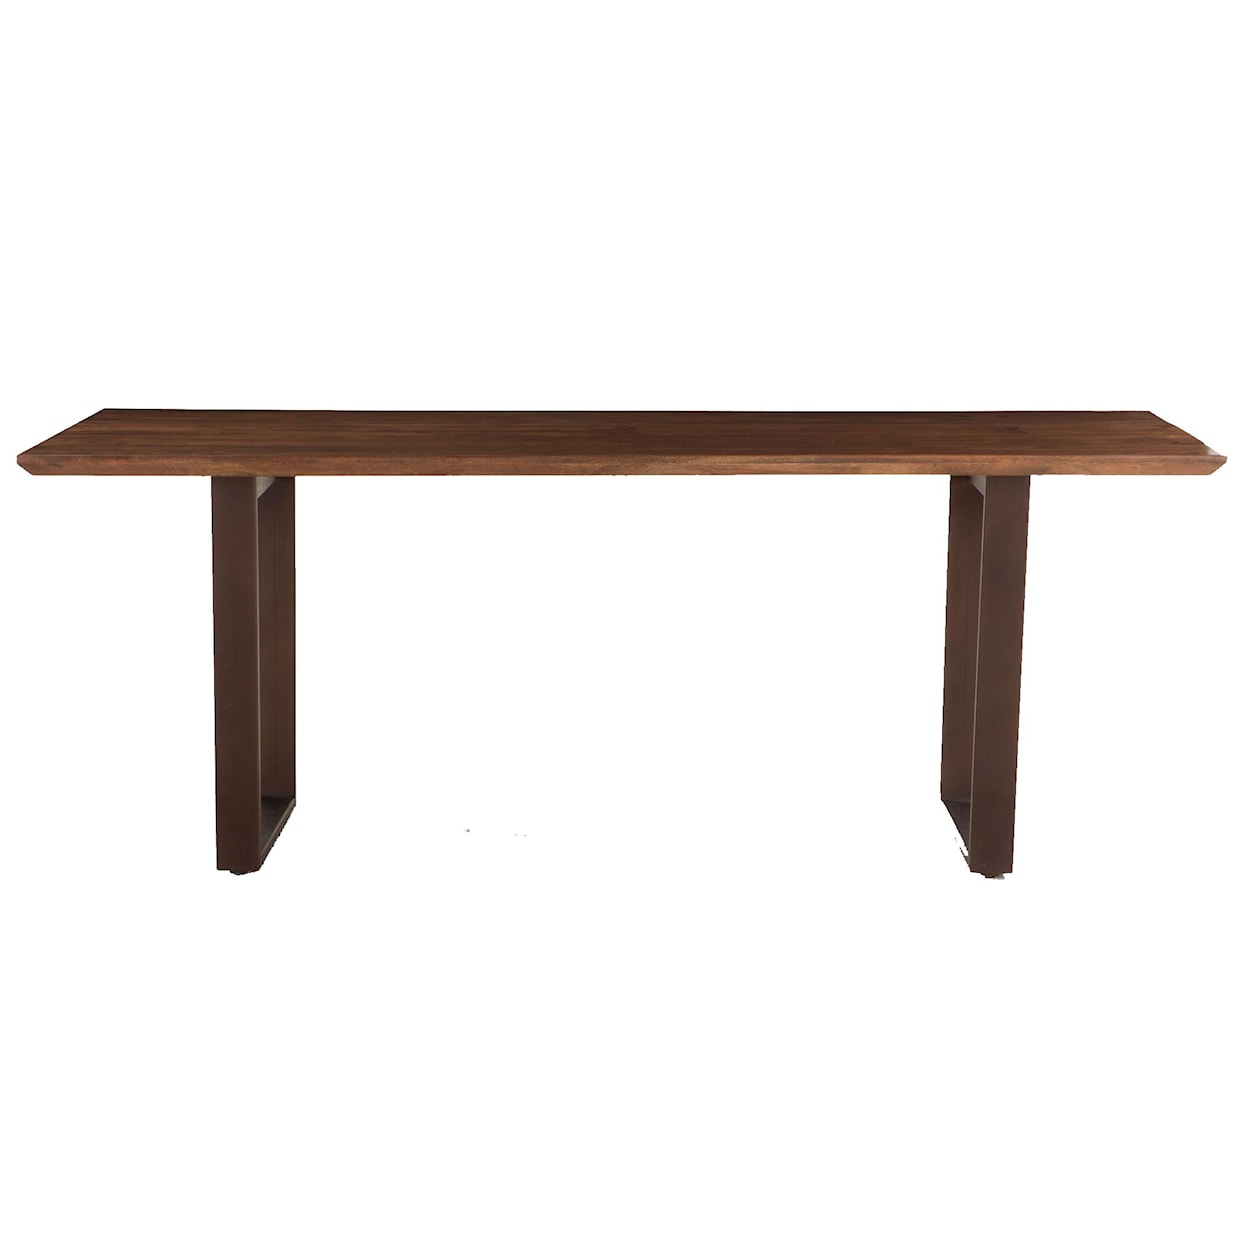 Home Trends & Design FMZ 78" Wood Top Table